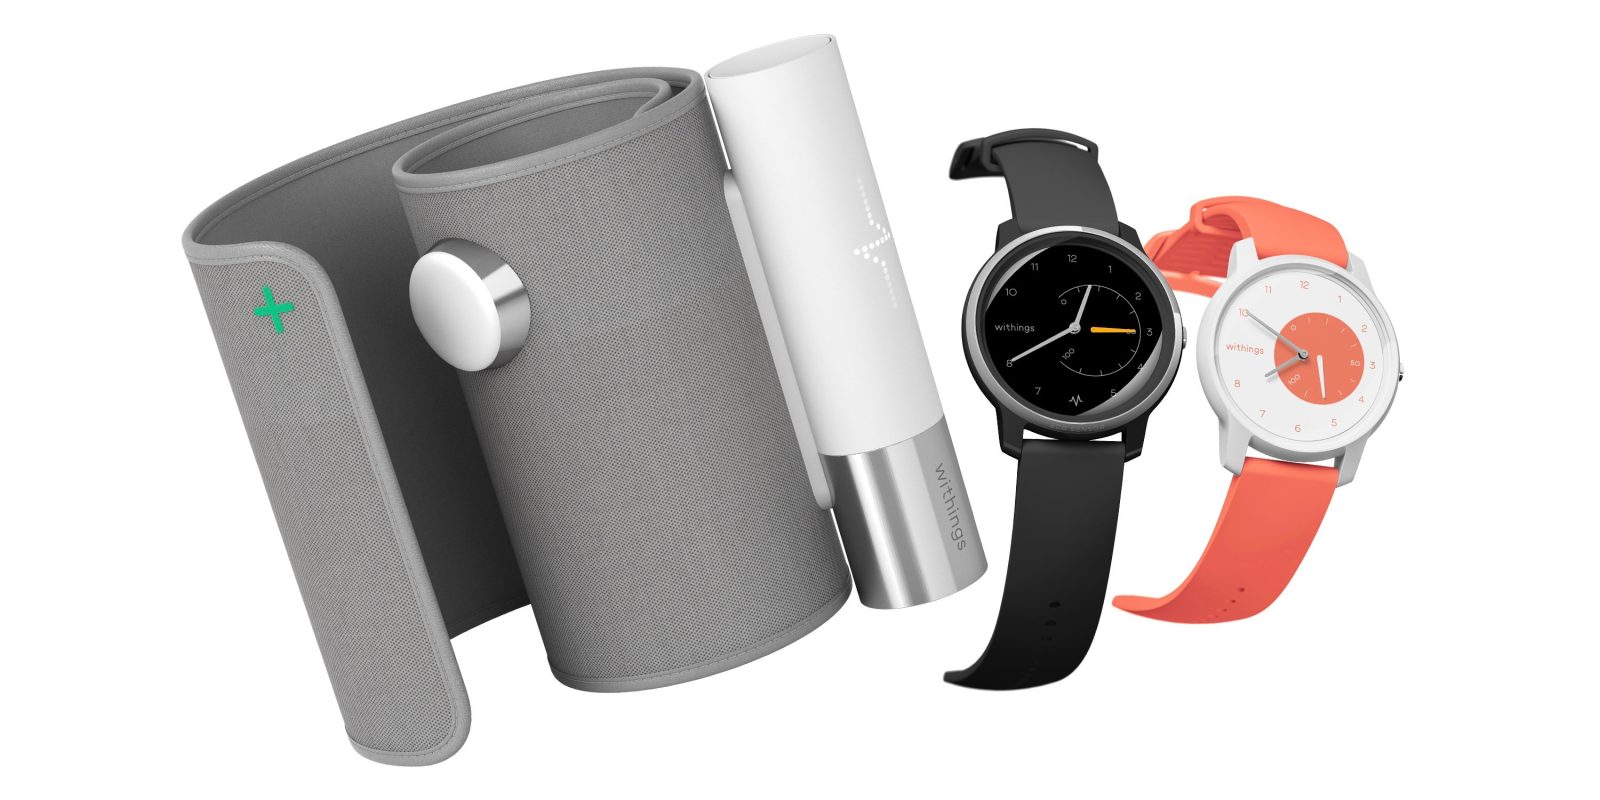 Withings ECG smartwatch